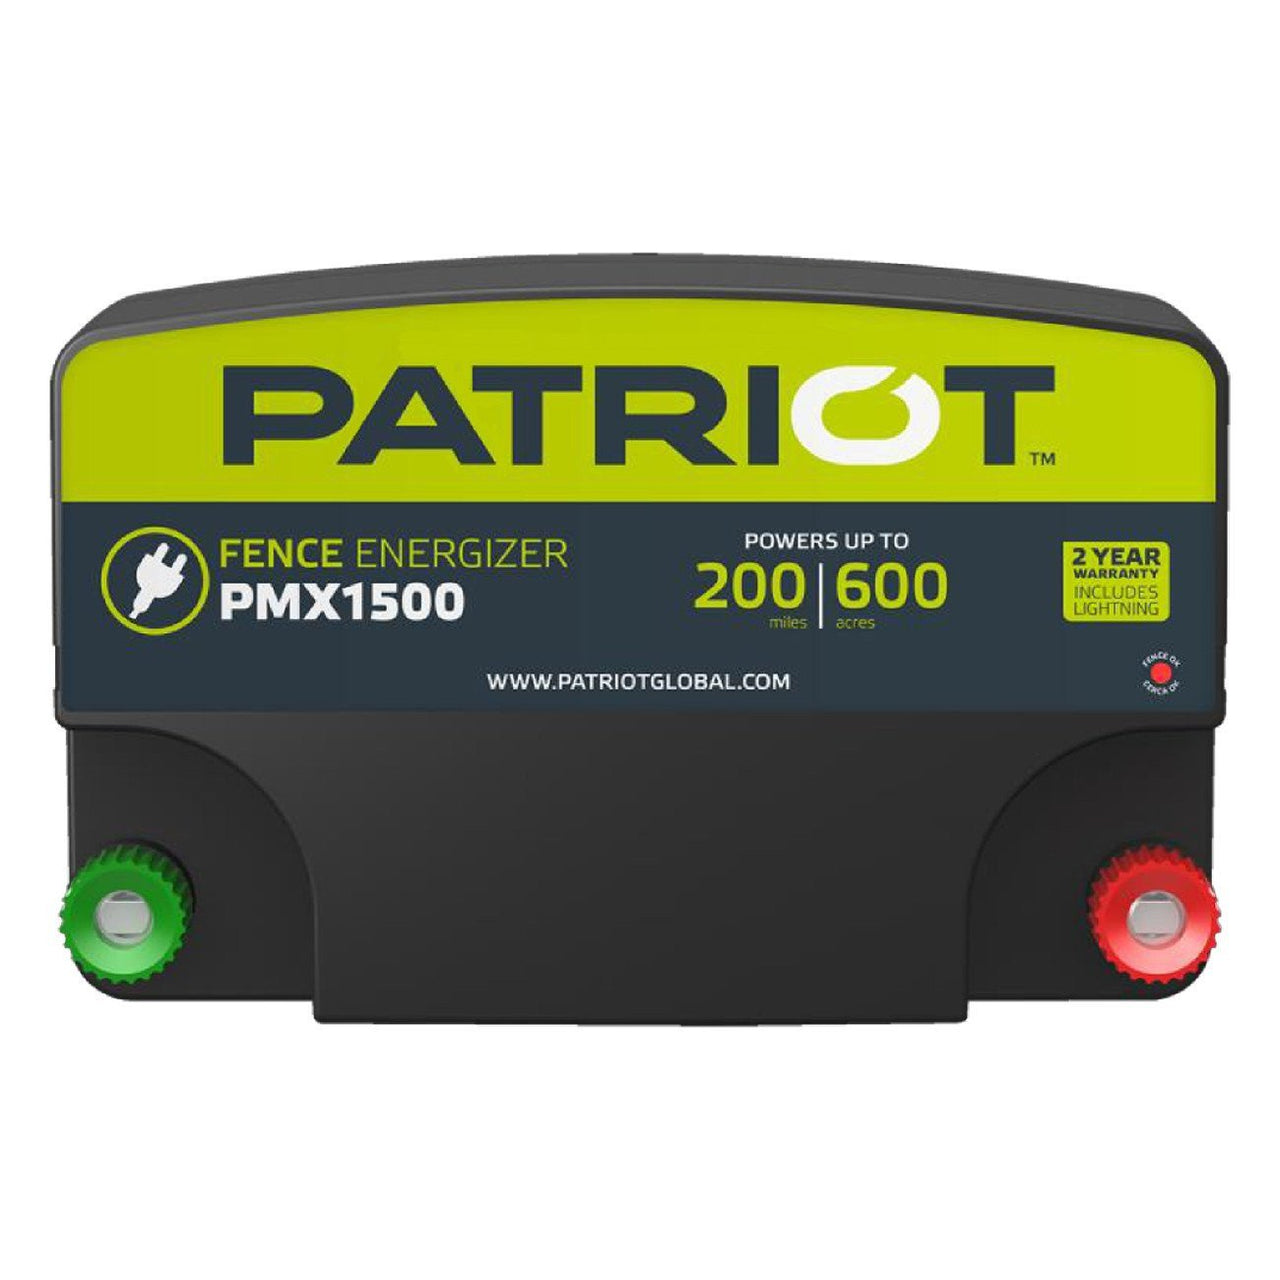 Patriot Pmx1500 Fence Charger (110V) - Fencing Patriot - Canada